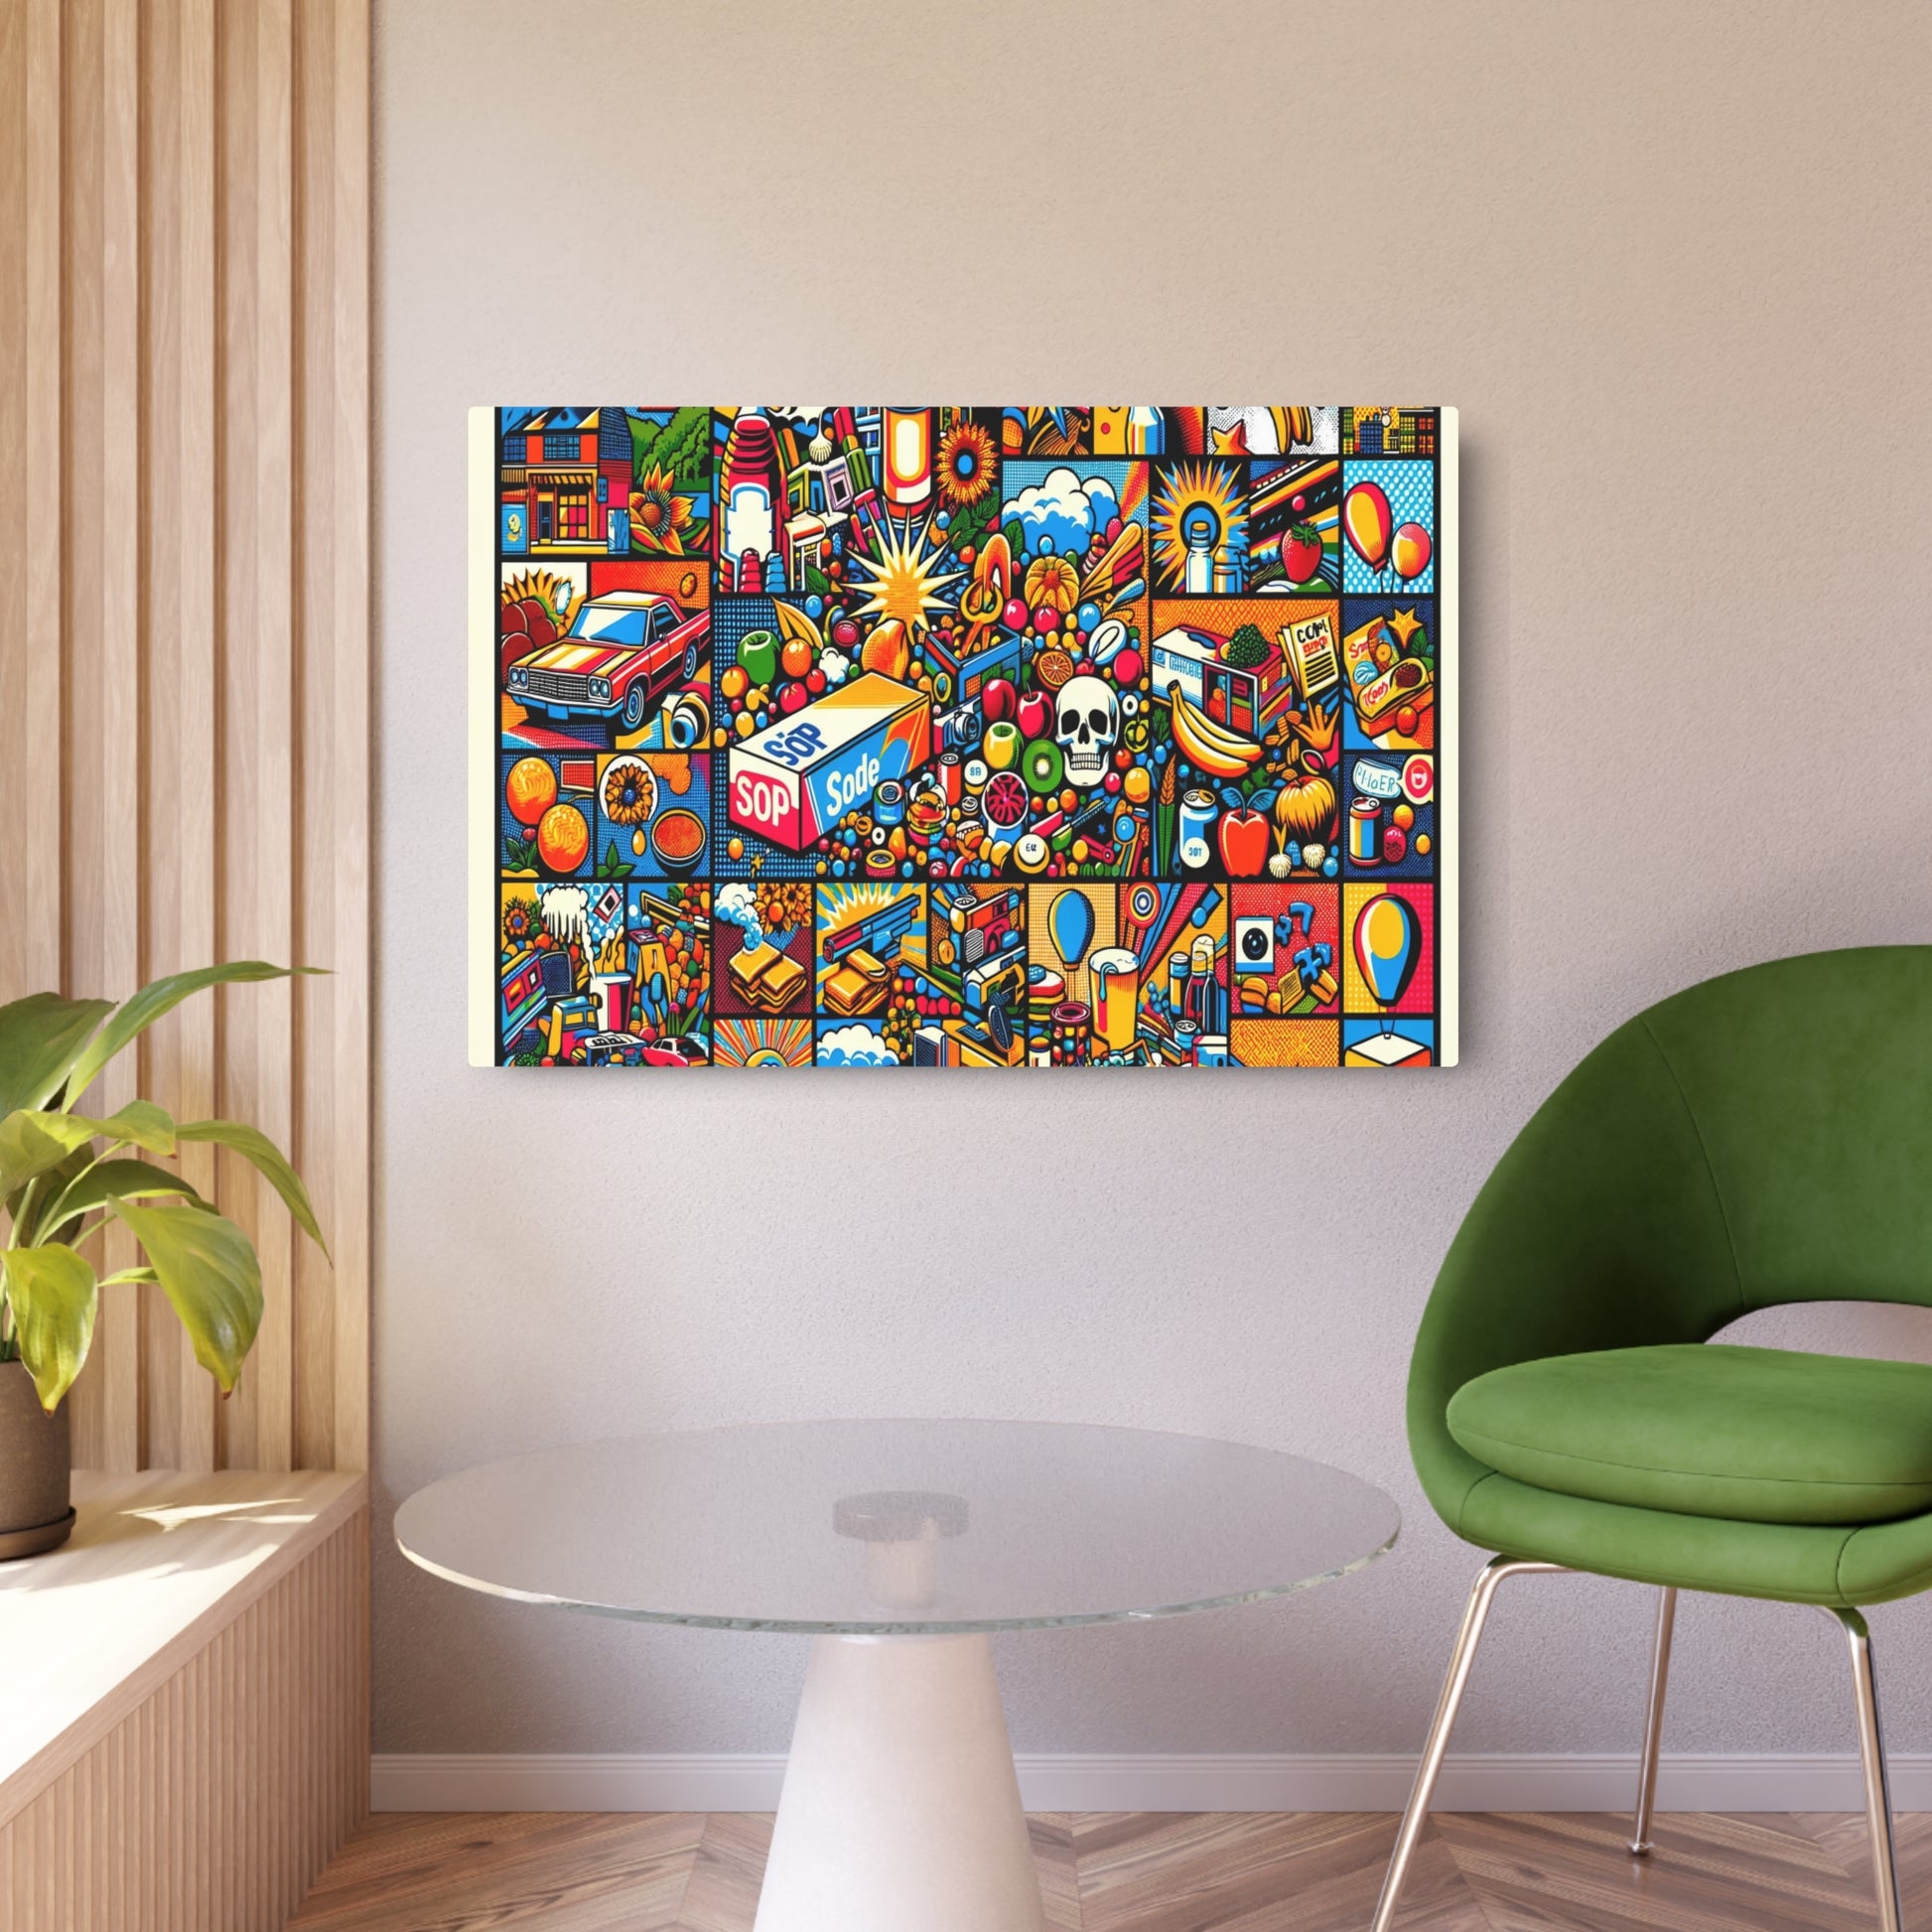 Metal Poster Art | "Vibrant Pop Art Inspired Masterpiece - Modern Contemporary Style with Bold Imagery & Color Saturation"